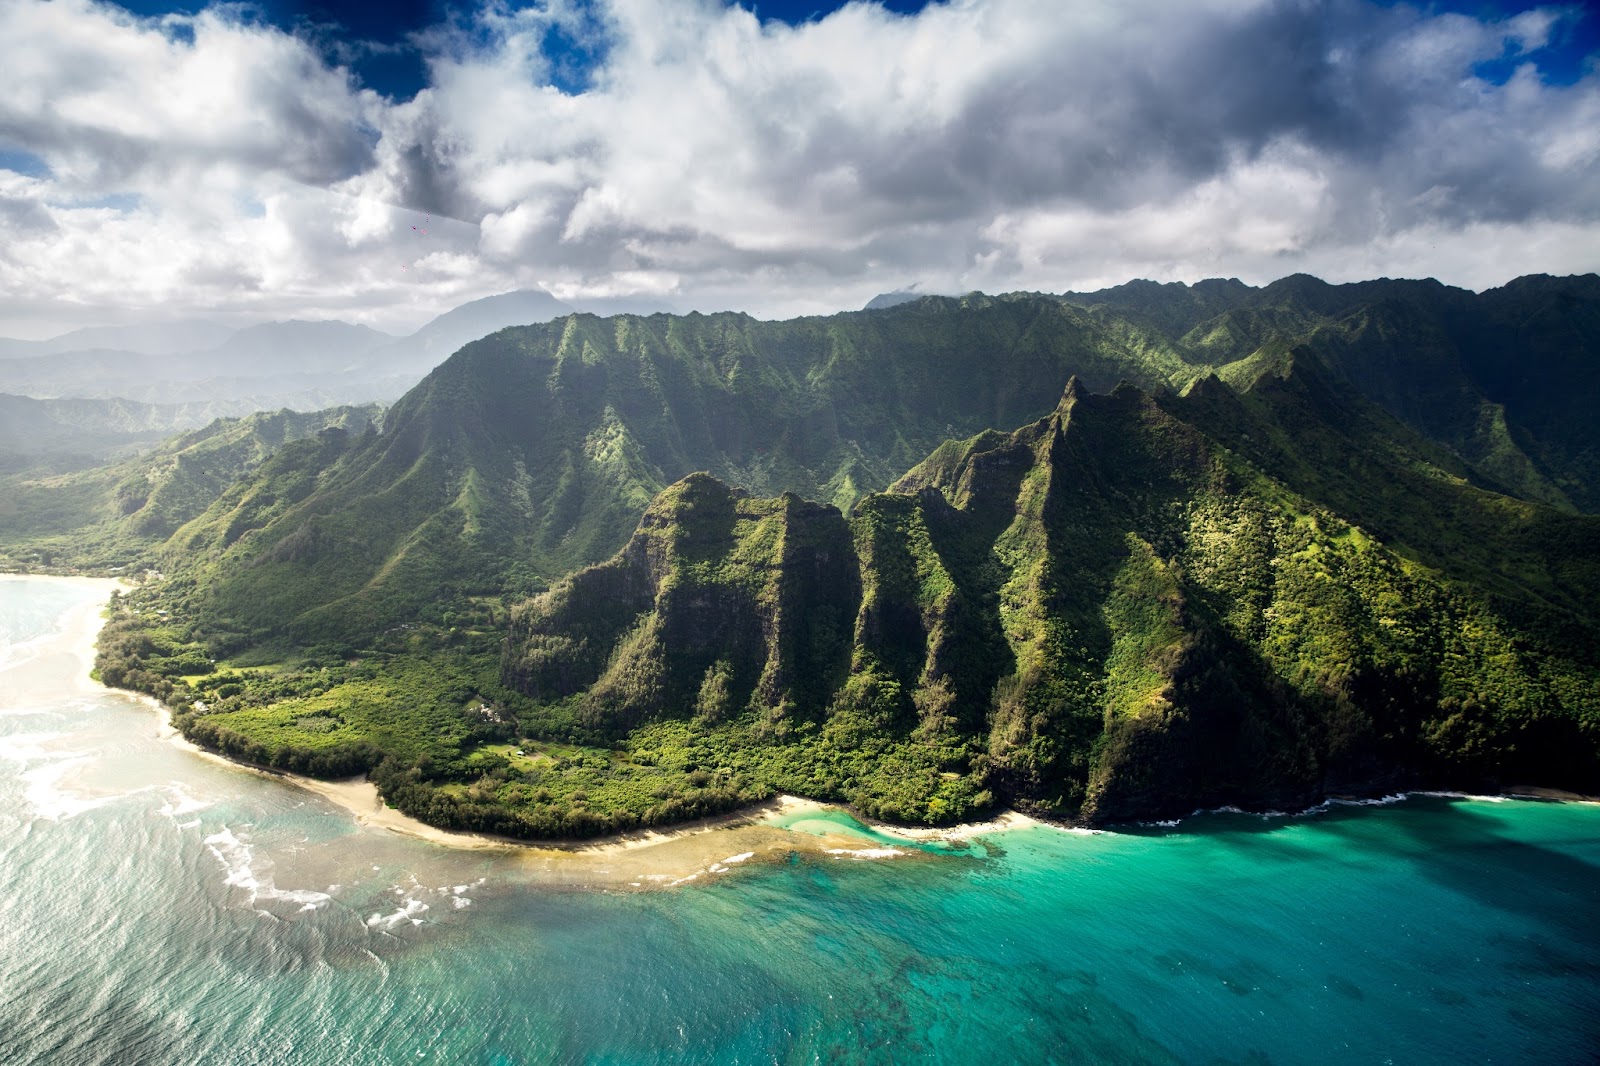 Scenic helicopter tour over Hawaii's volcanic terrain and breathtaking landscape.